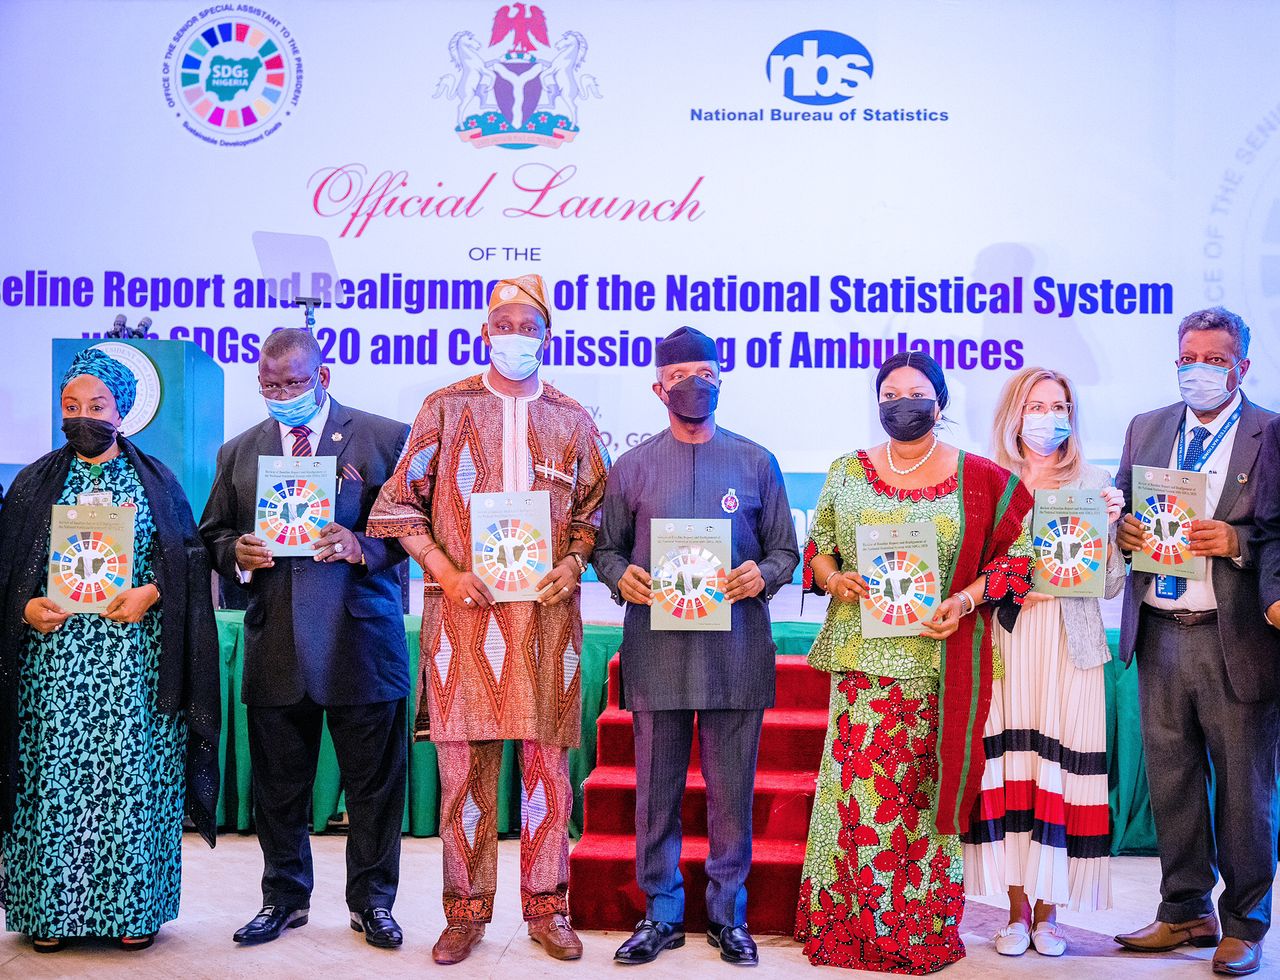 Official Launch Of The Baseline Report & Realignment Of The National Statistical System With SDGs 2020 & Commissioning Of Ambulances On 21/12/2021